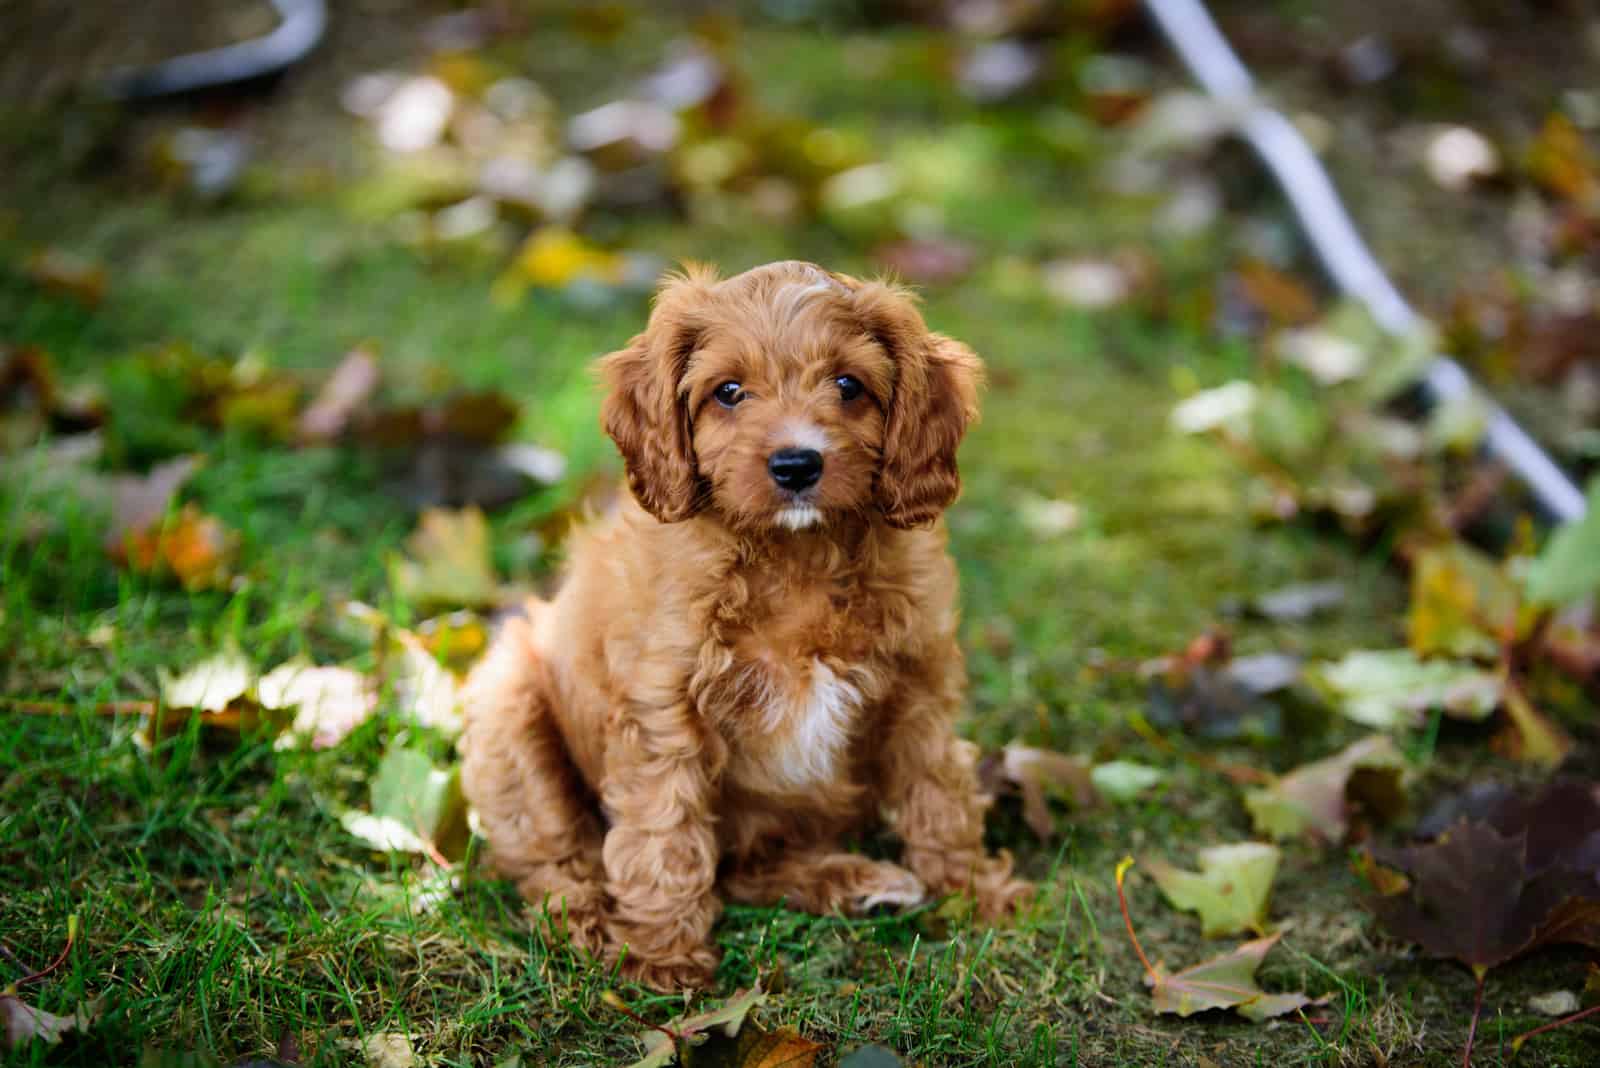 Cavapoo puppy sitting on grass looking at camera